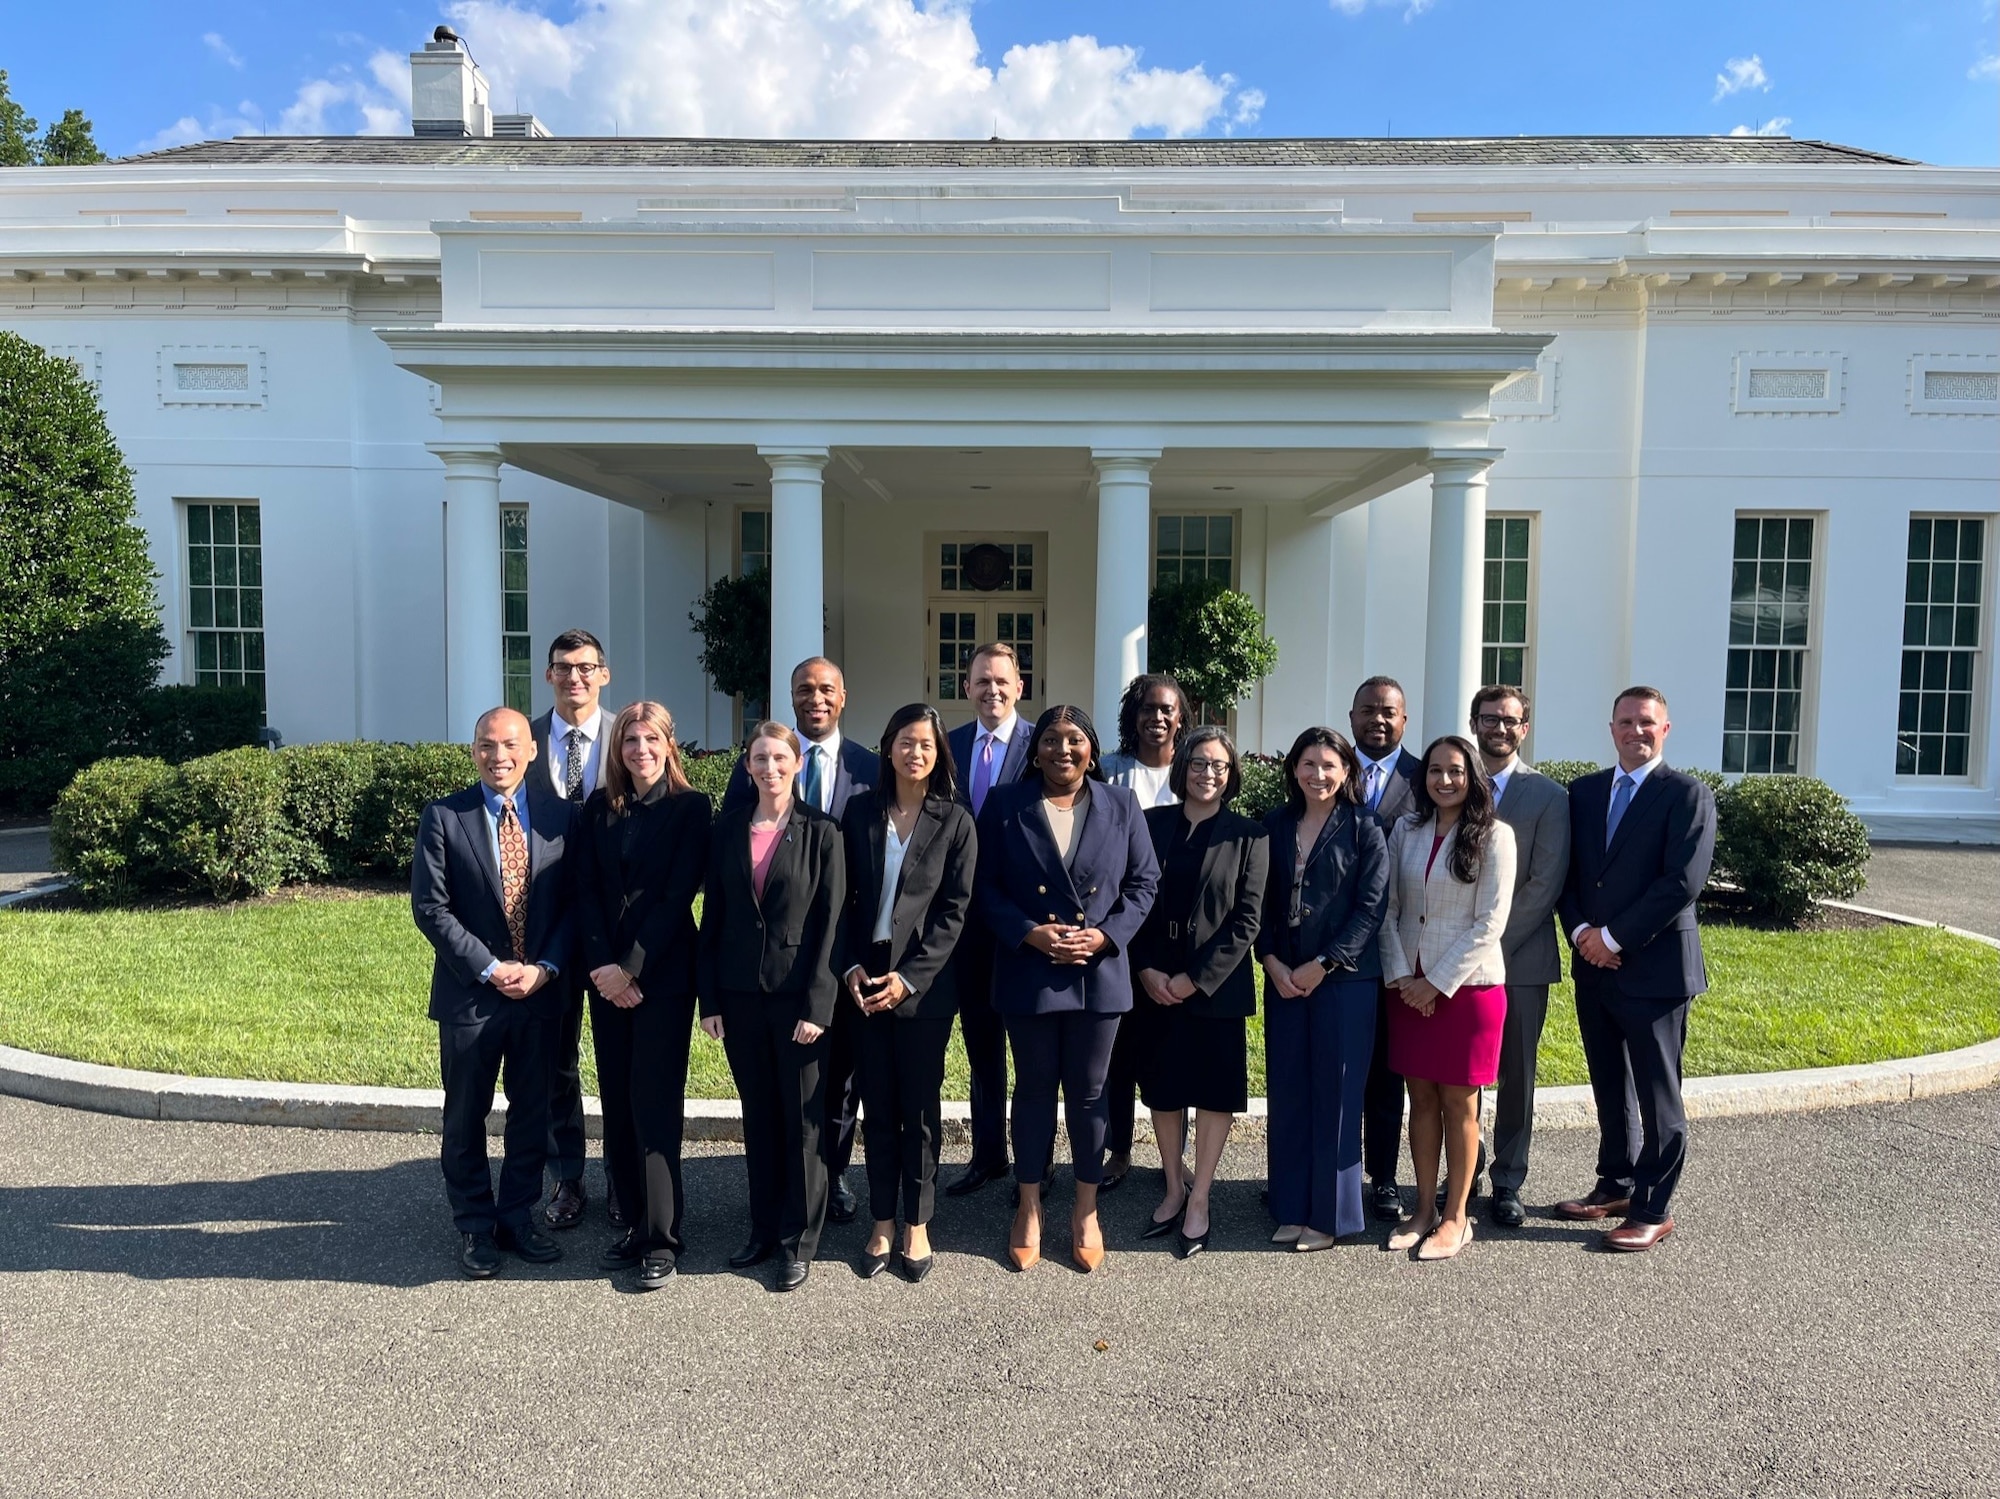 Space Force Lt. Col. Anna Gunn-Golkin, (third from left in the front row), who was selected for a White House Fellowship, stands with her cohorts in front of the White House. (Courtesy photo)